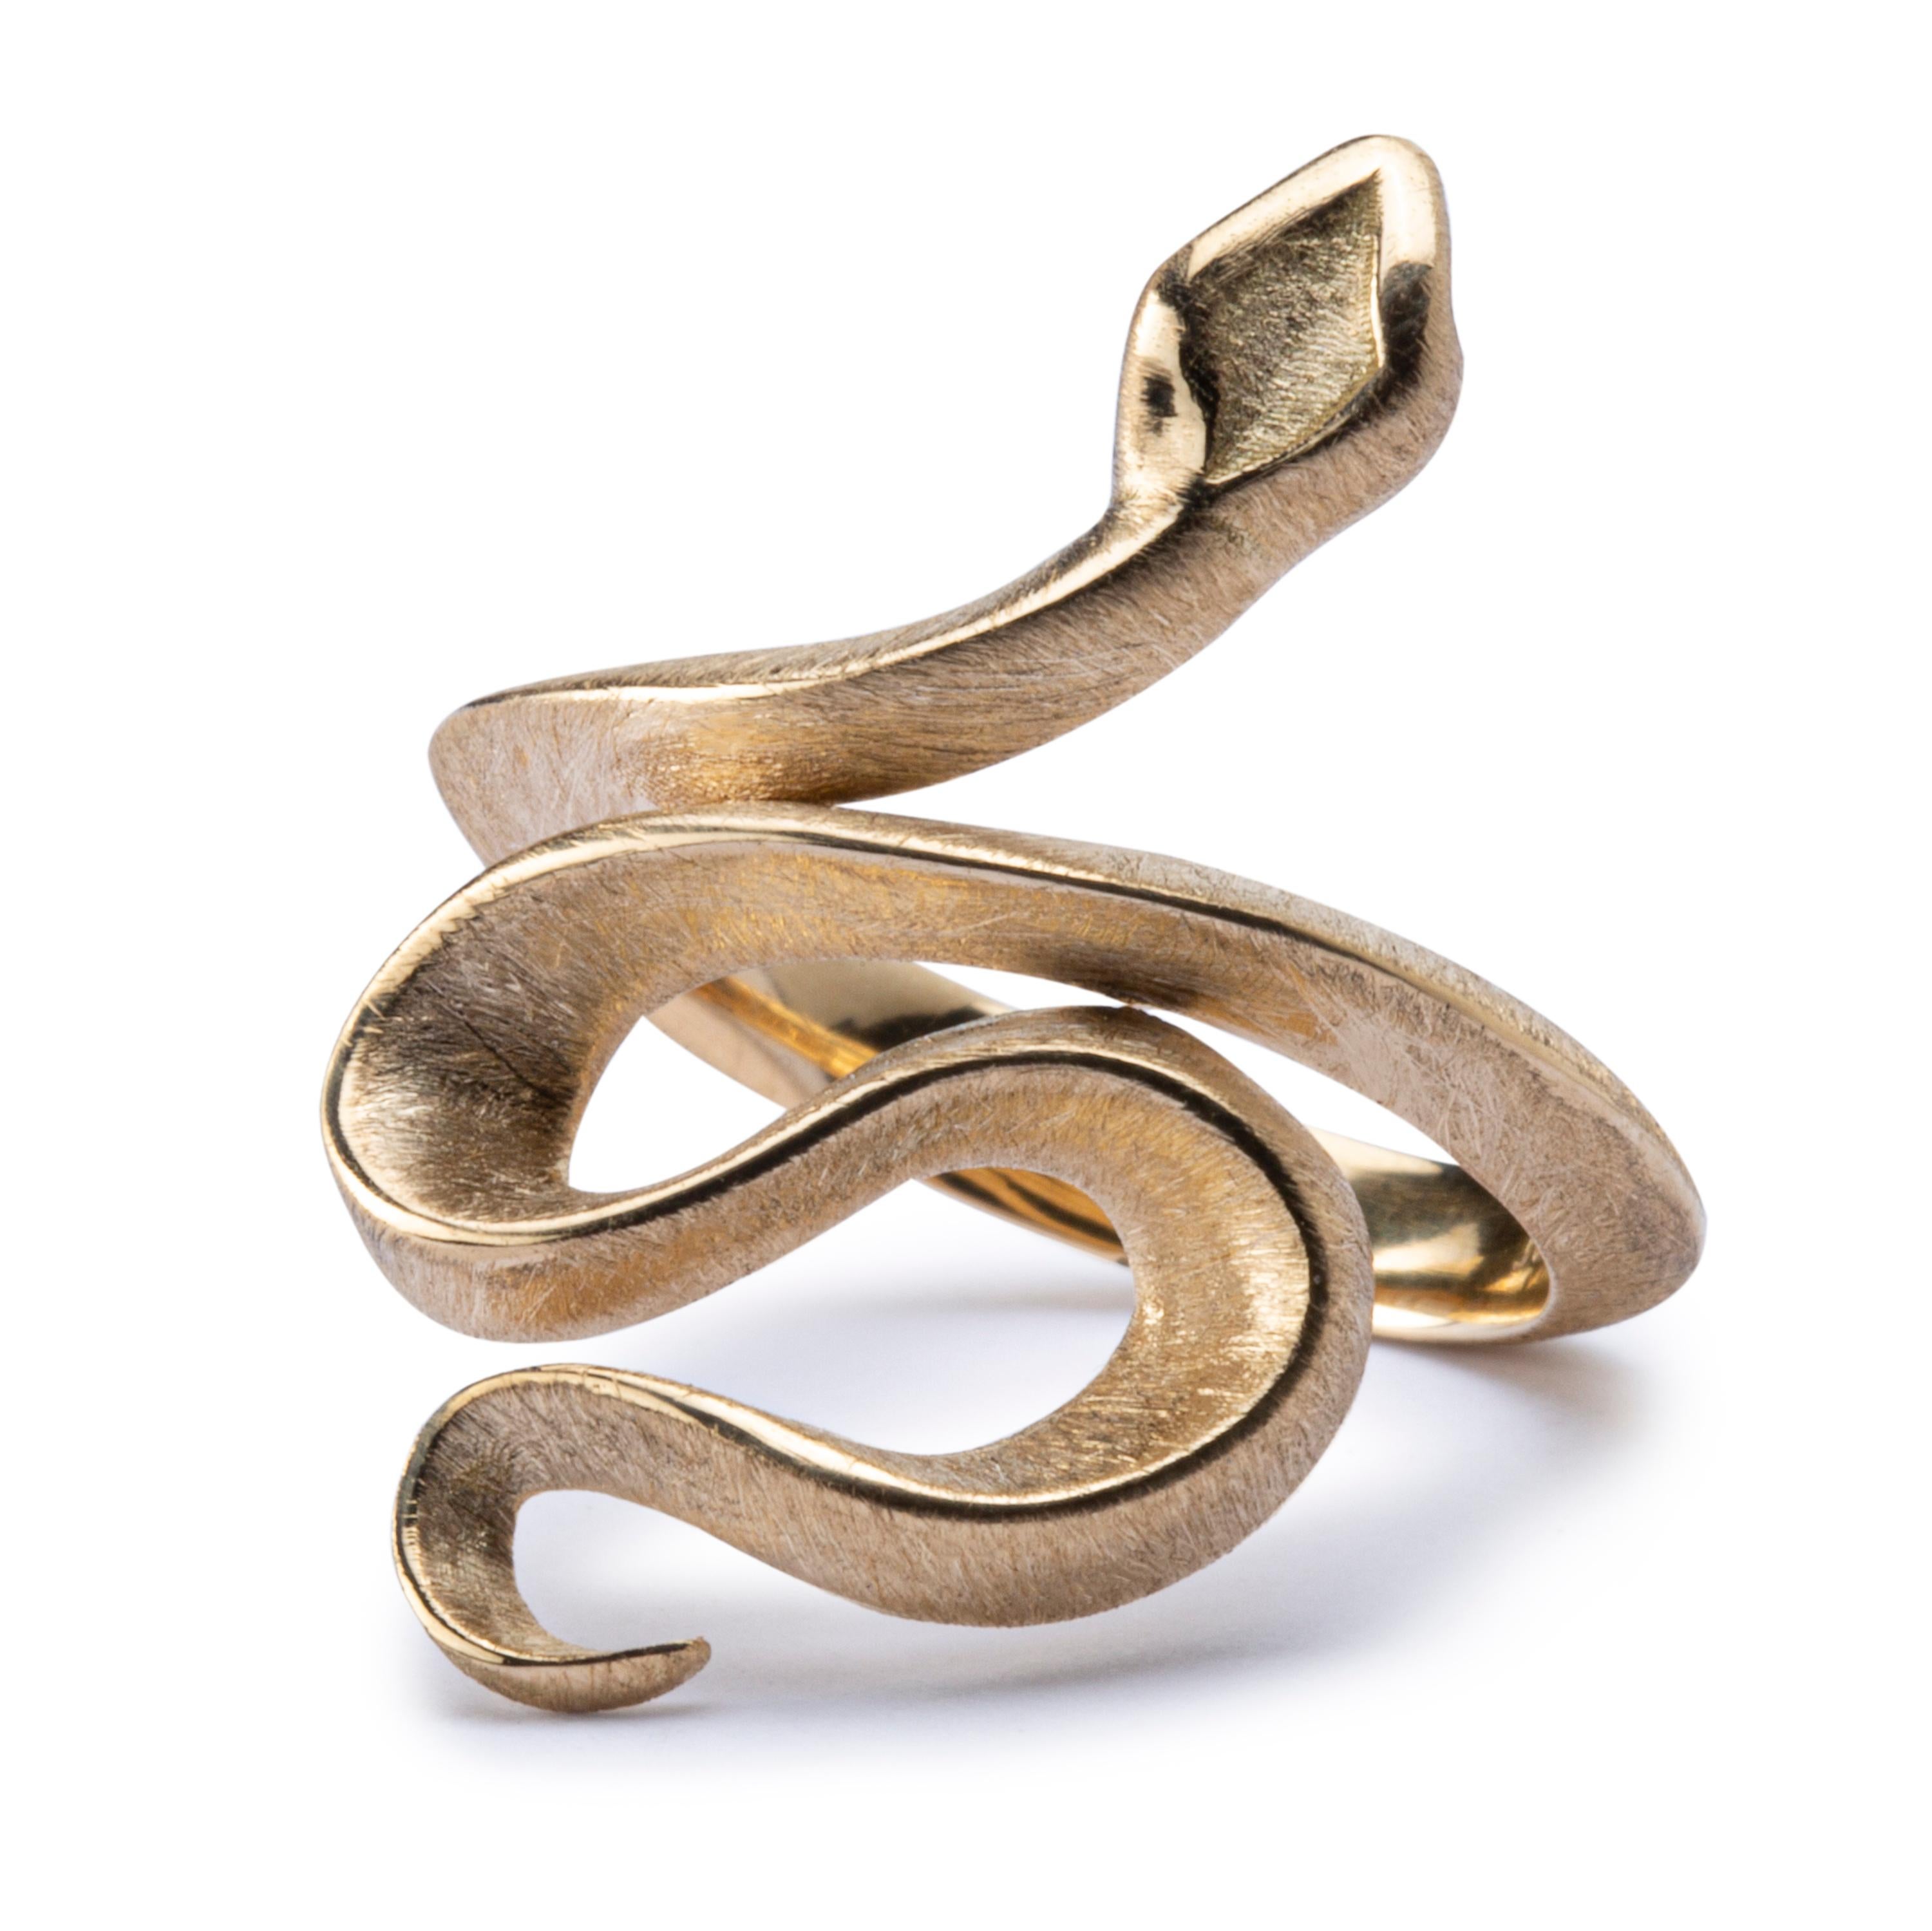 Alex Jona design collection, hand crafted in Italy, 18 Karat brushed yellow gold coil serpent ring. The eyes set with two white diamond eyes. Ring size US 6- EU 12. Can be sized to any specification.

Alex Jona jewels stand out, not only for their